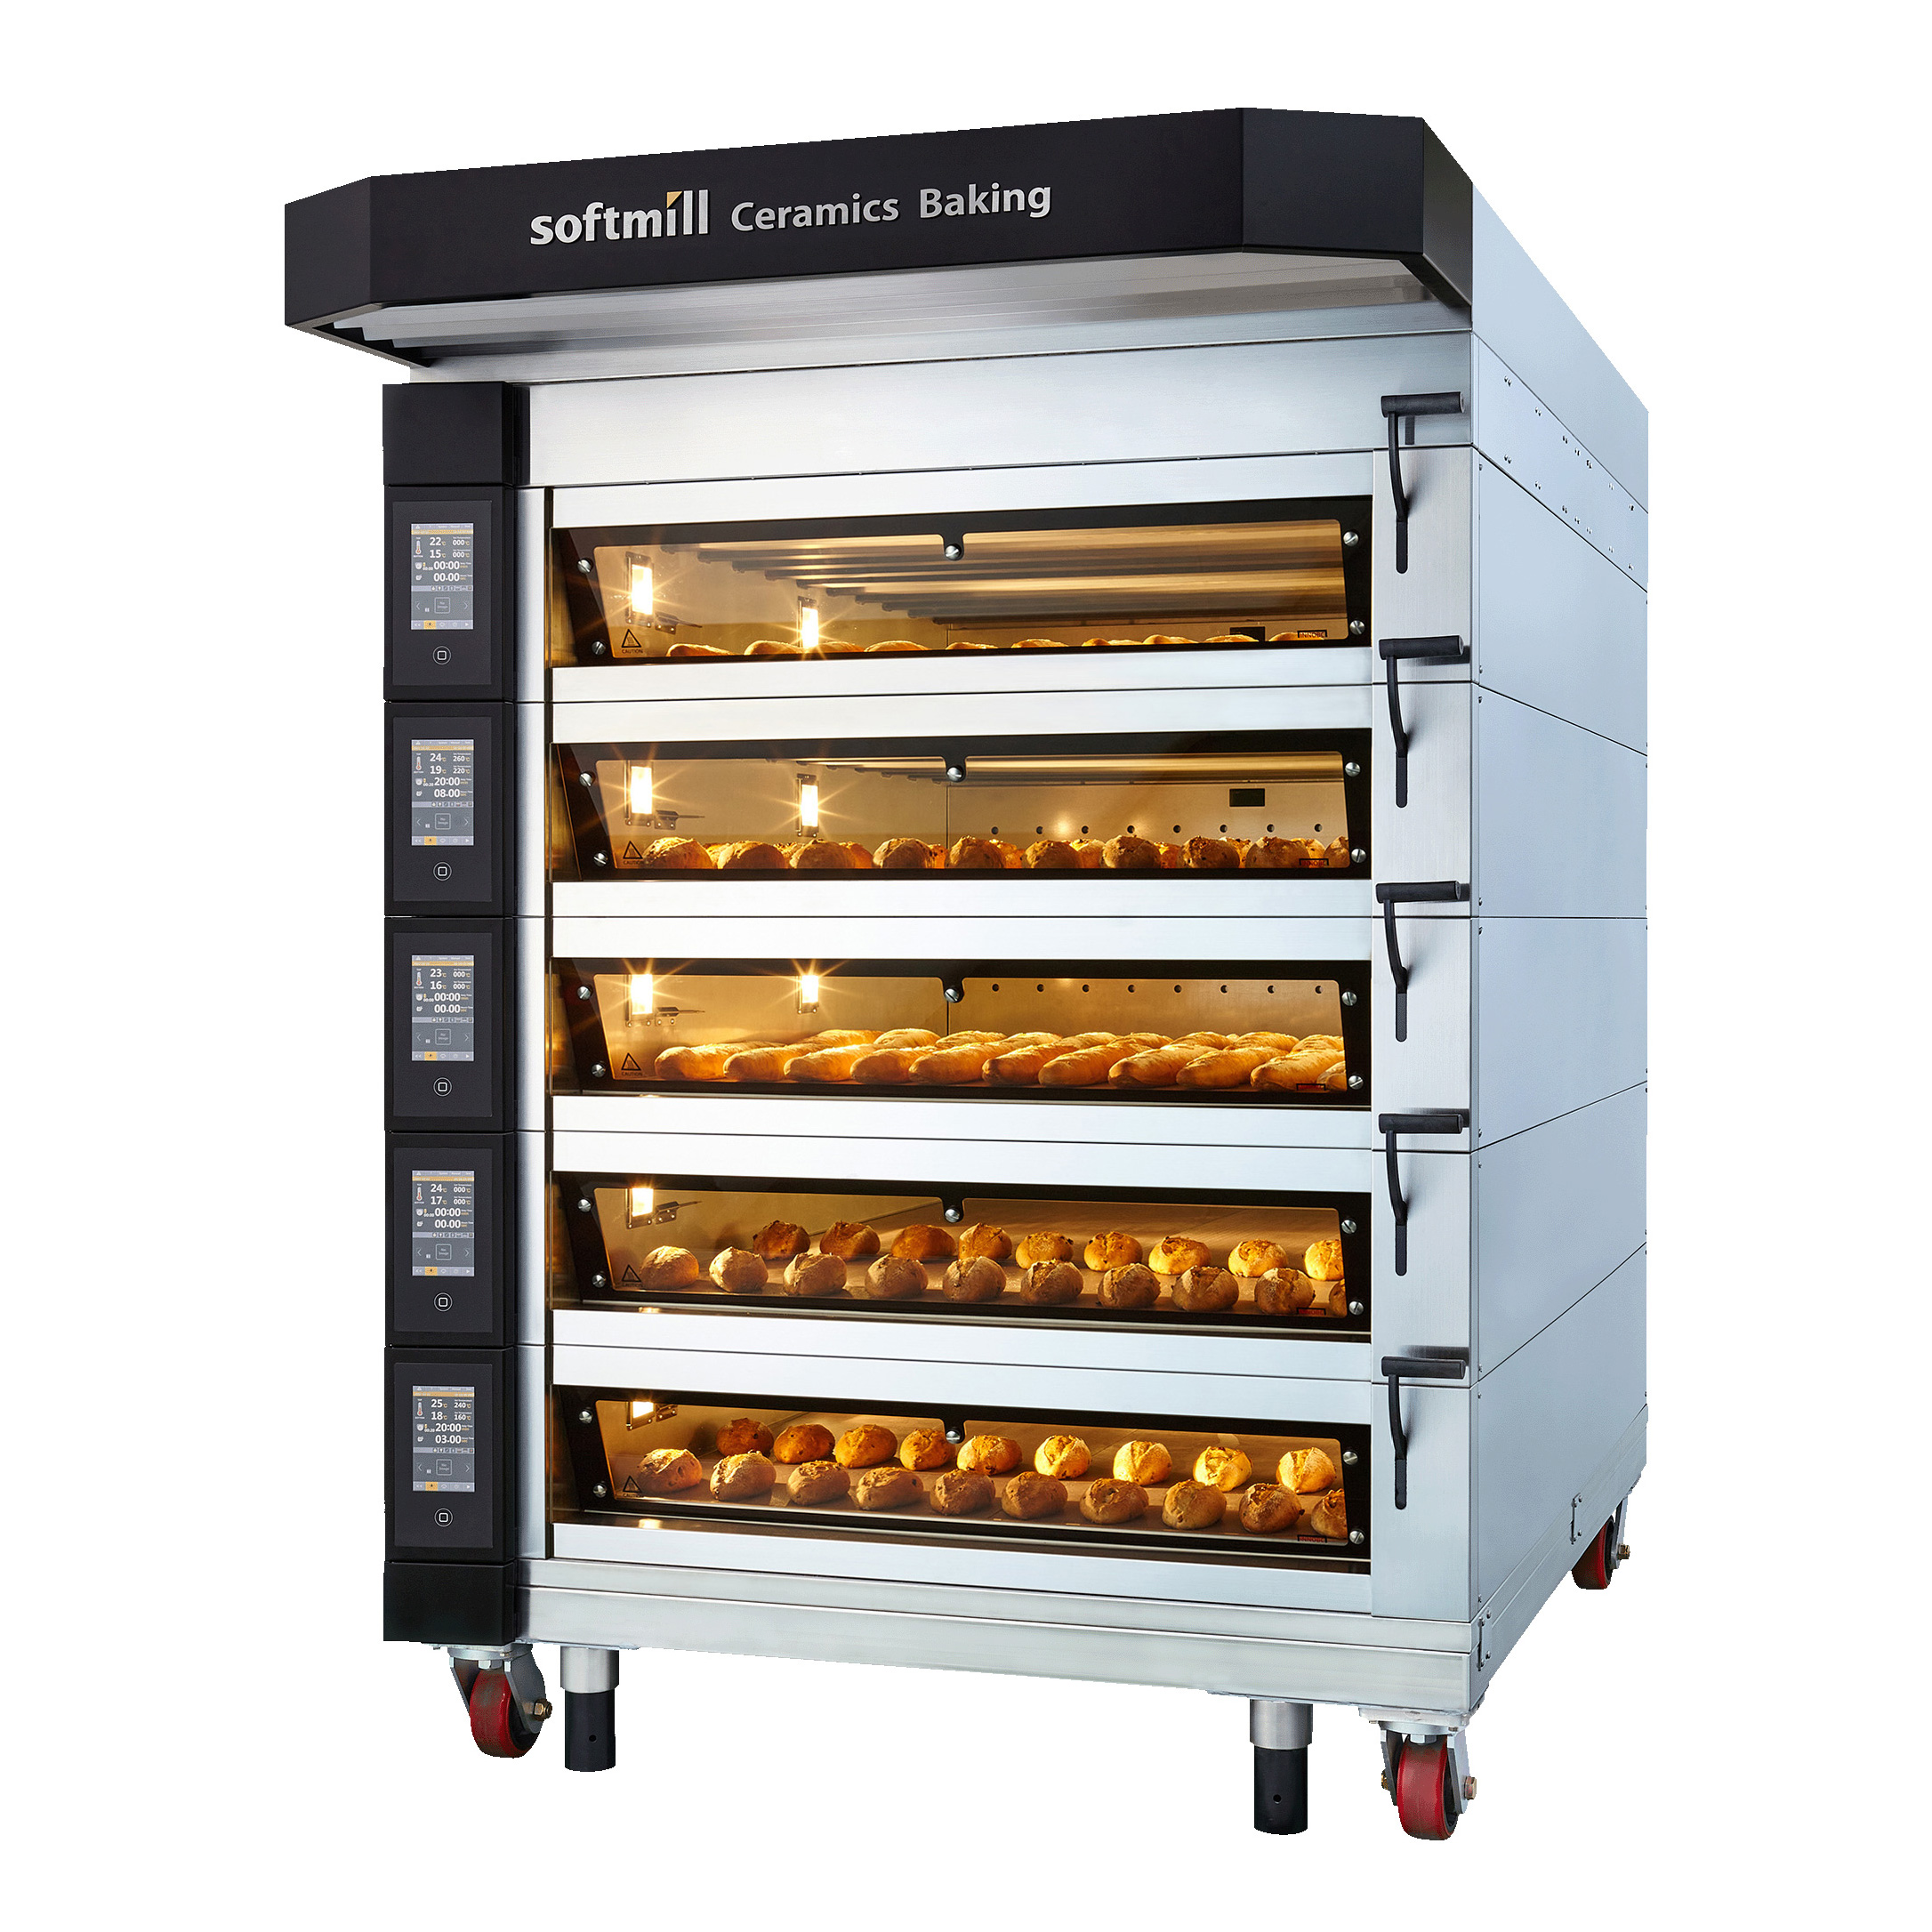 InnoBC Oven 8 trays 5 tiers detail mini size images